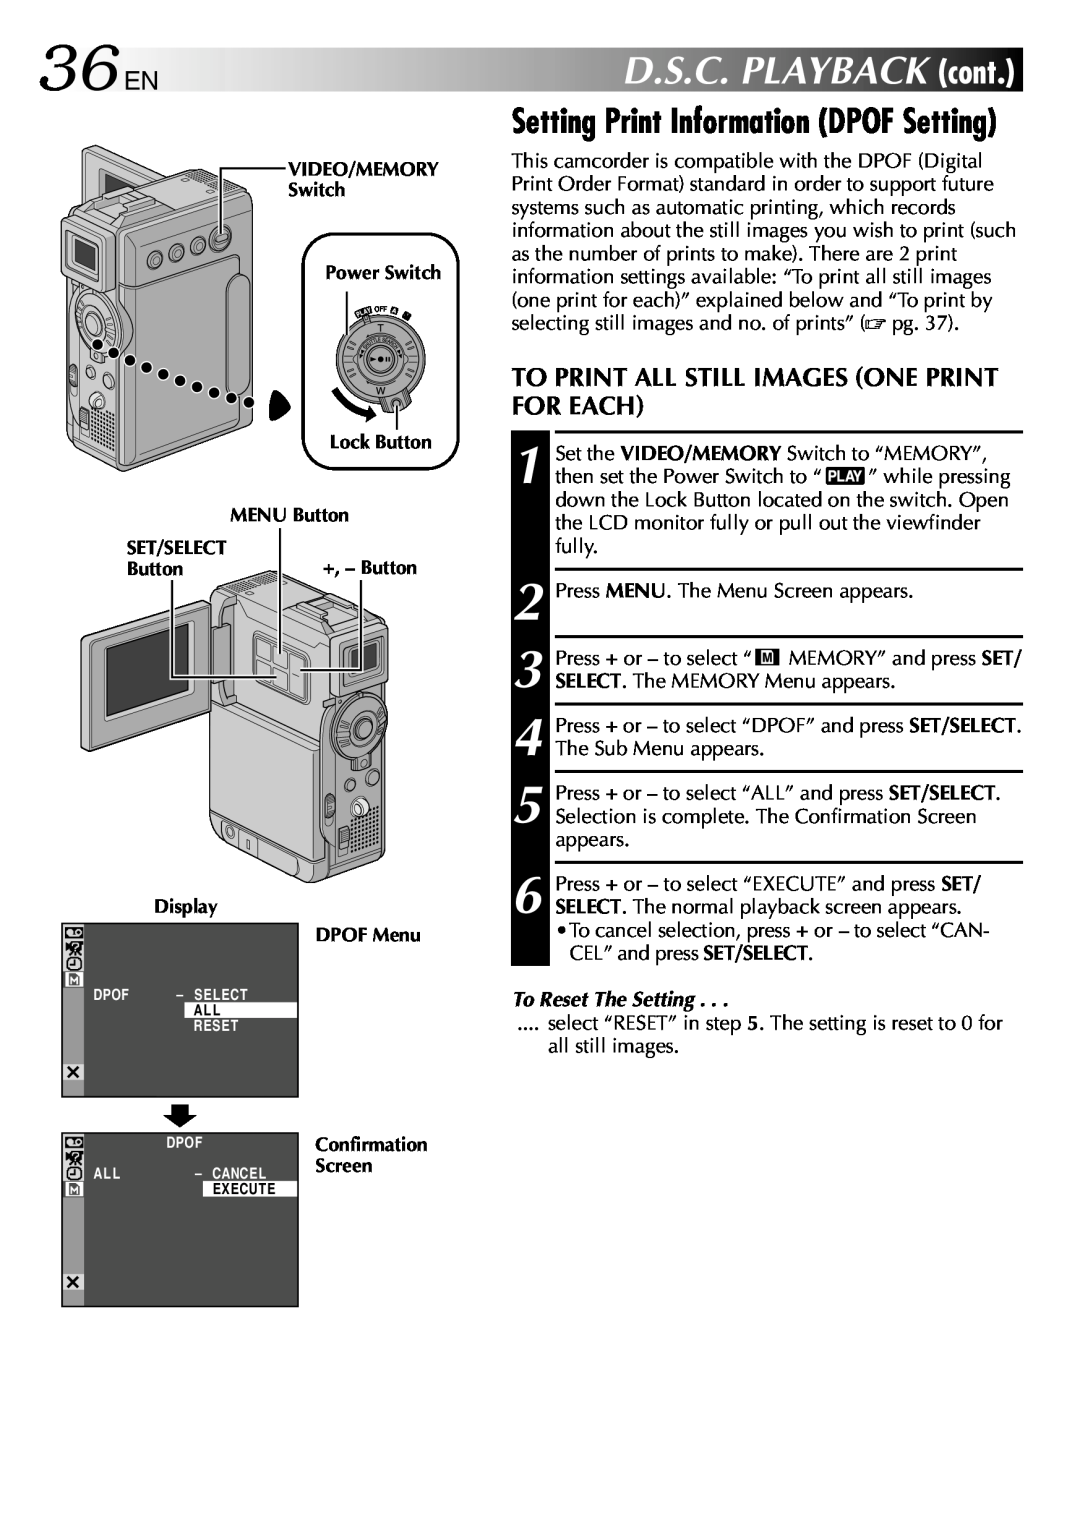 JVC GR-DVP3 specifications 36 EN, Setting Print Information DPOF Setting, To Print All Still Images One Print For Each 